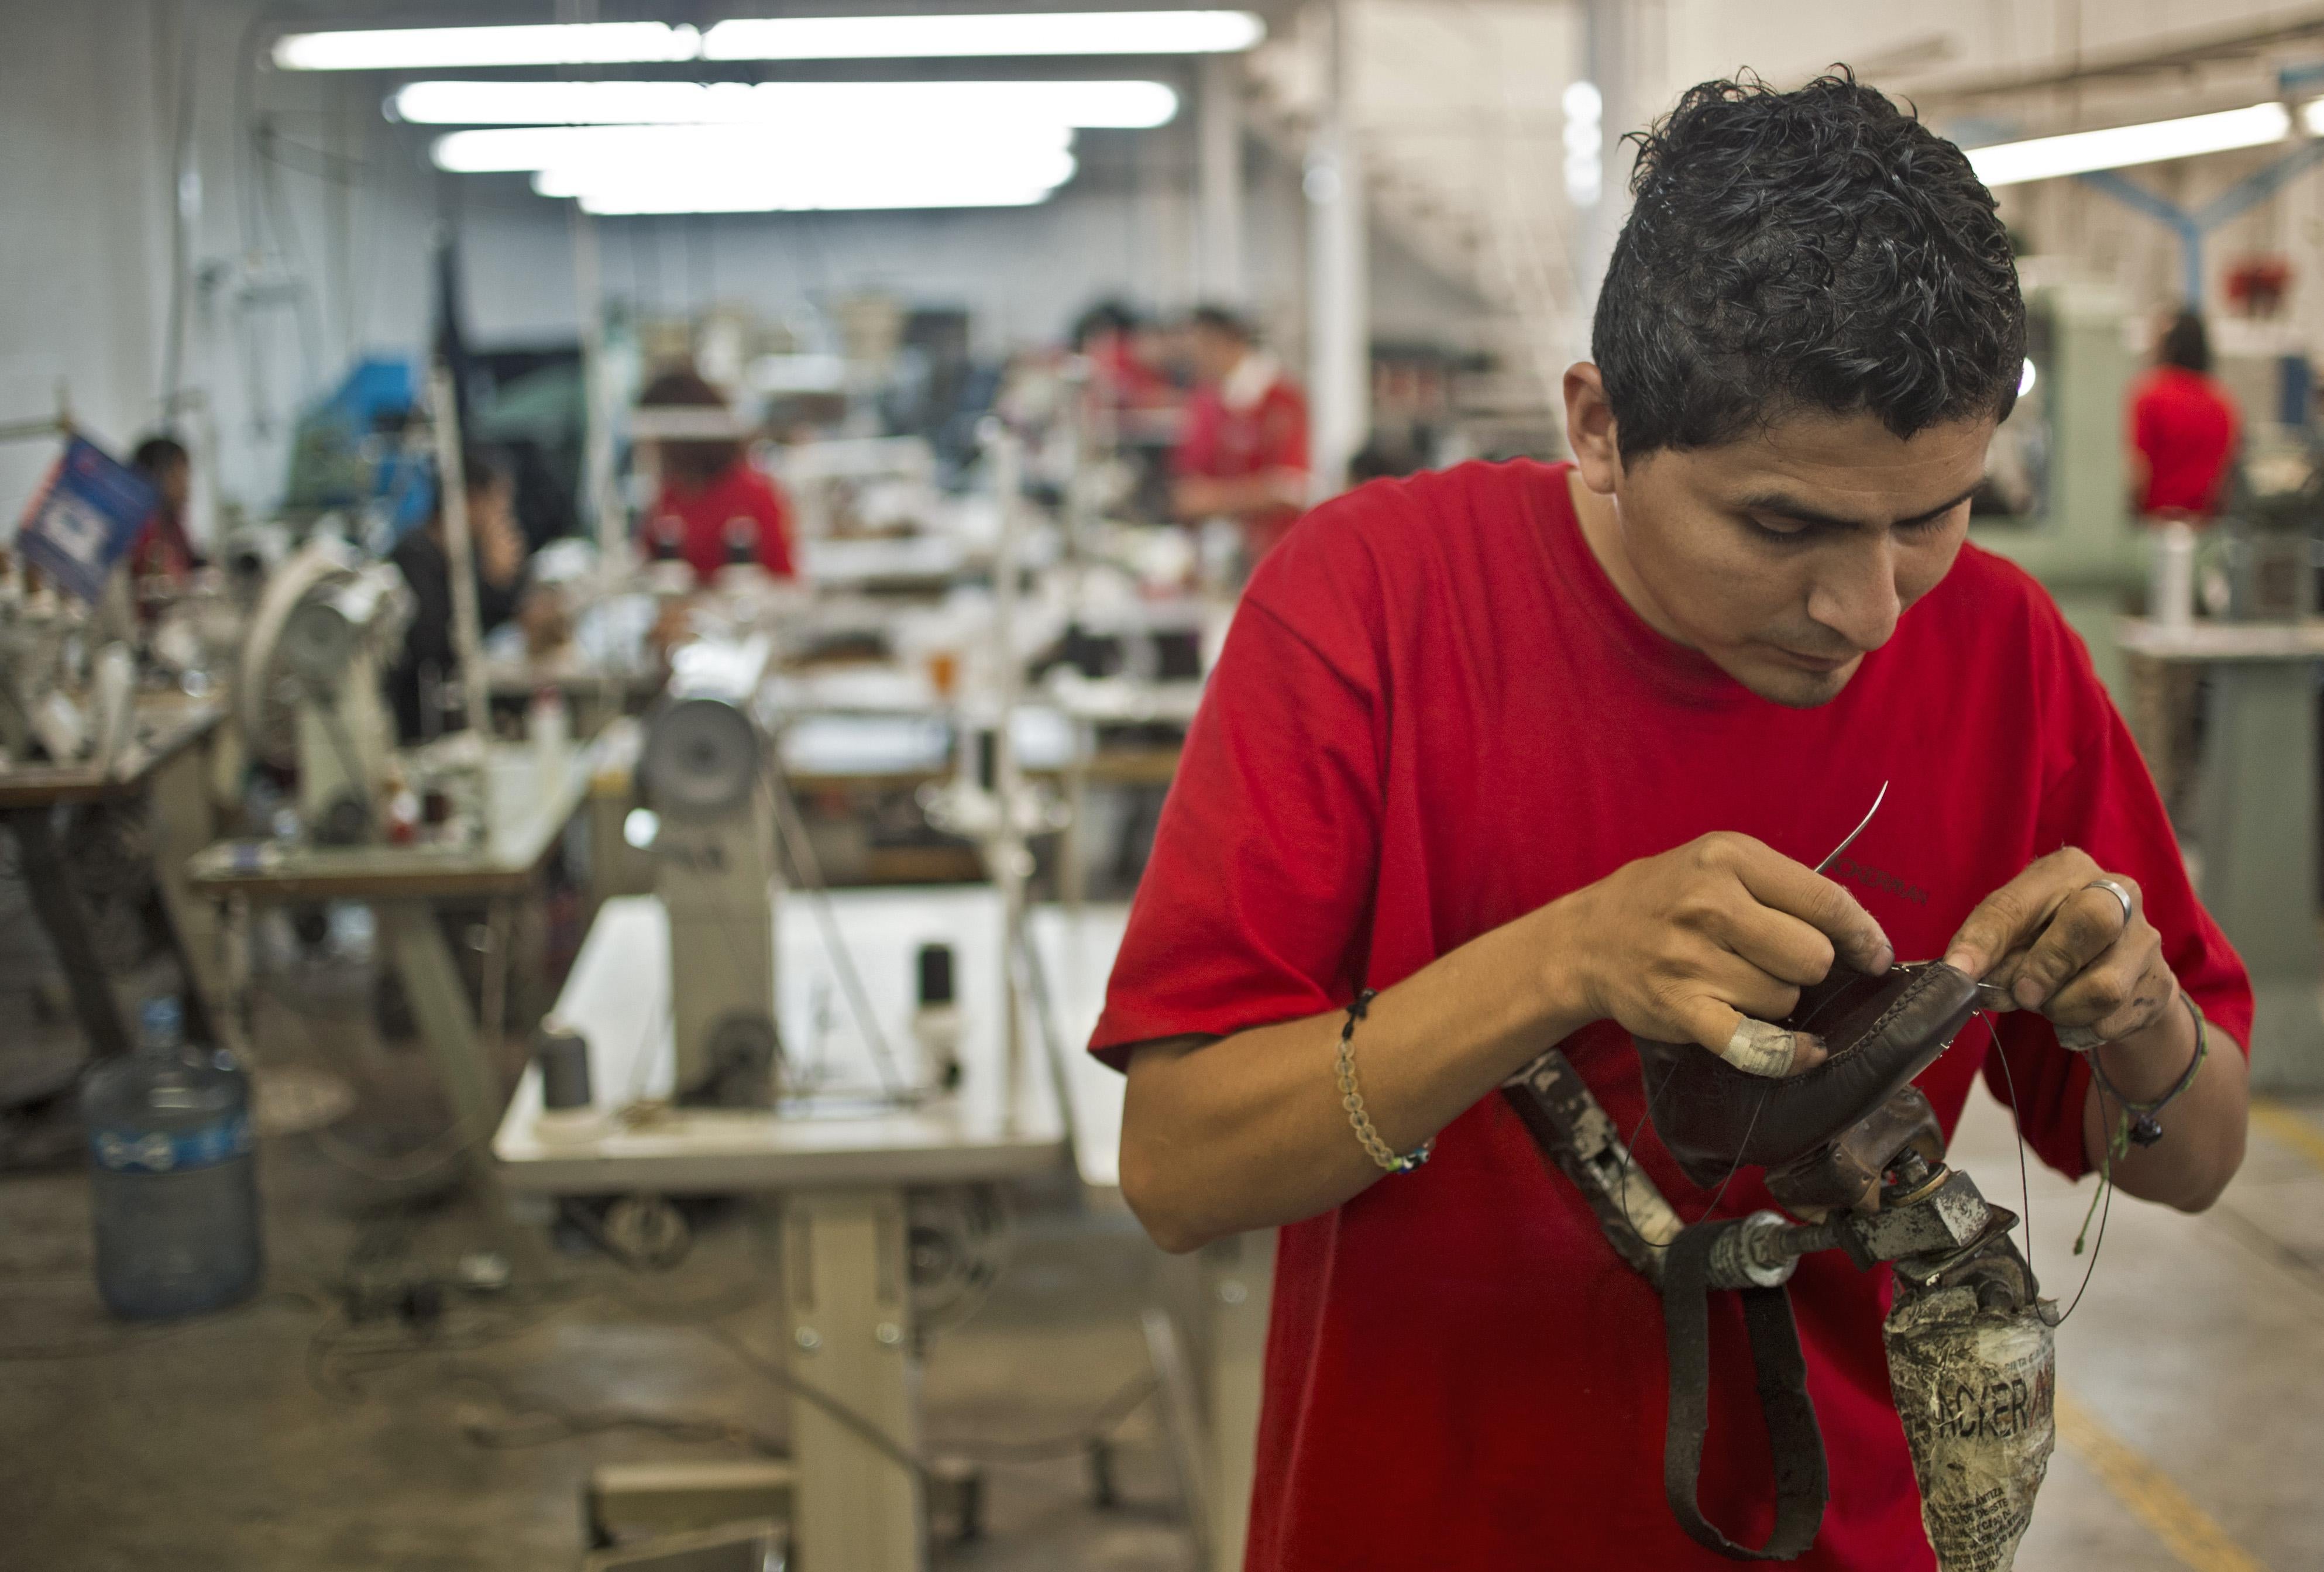 A worker sews a shoe in the factory where the shoes given to Pope Benedicto XVI during his 2012 visit to Mexico were made, in Leon, Guanajuato State, on March 1, 2013.